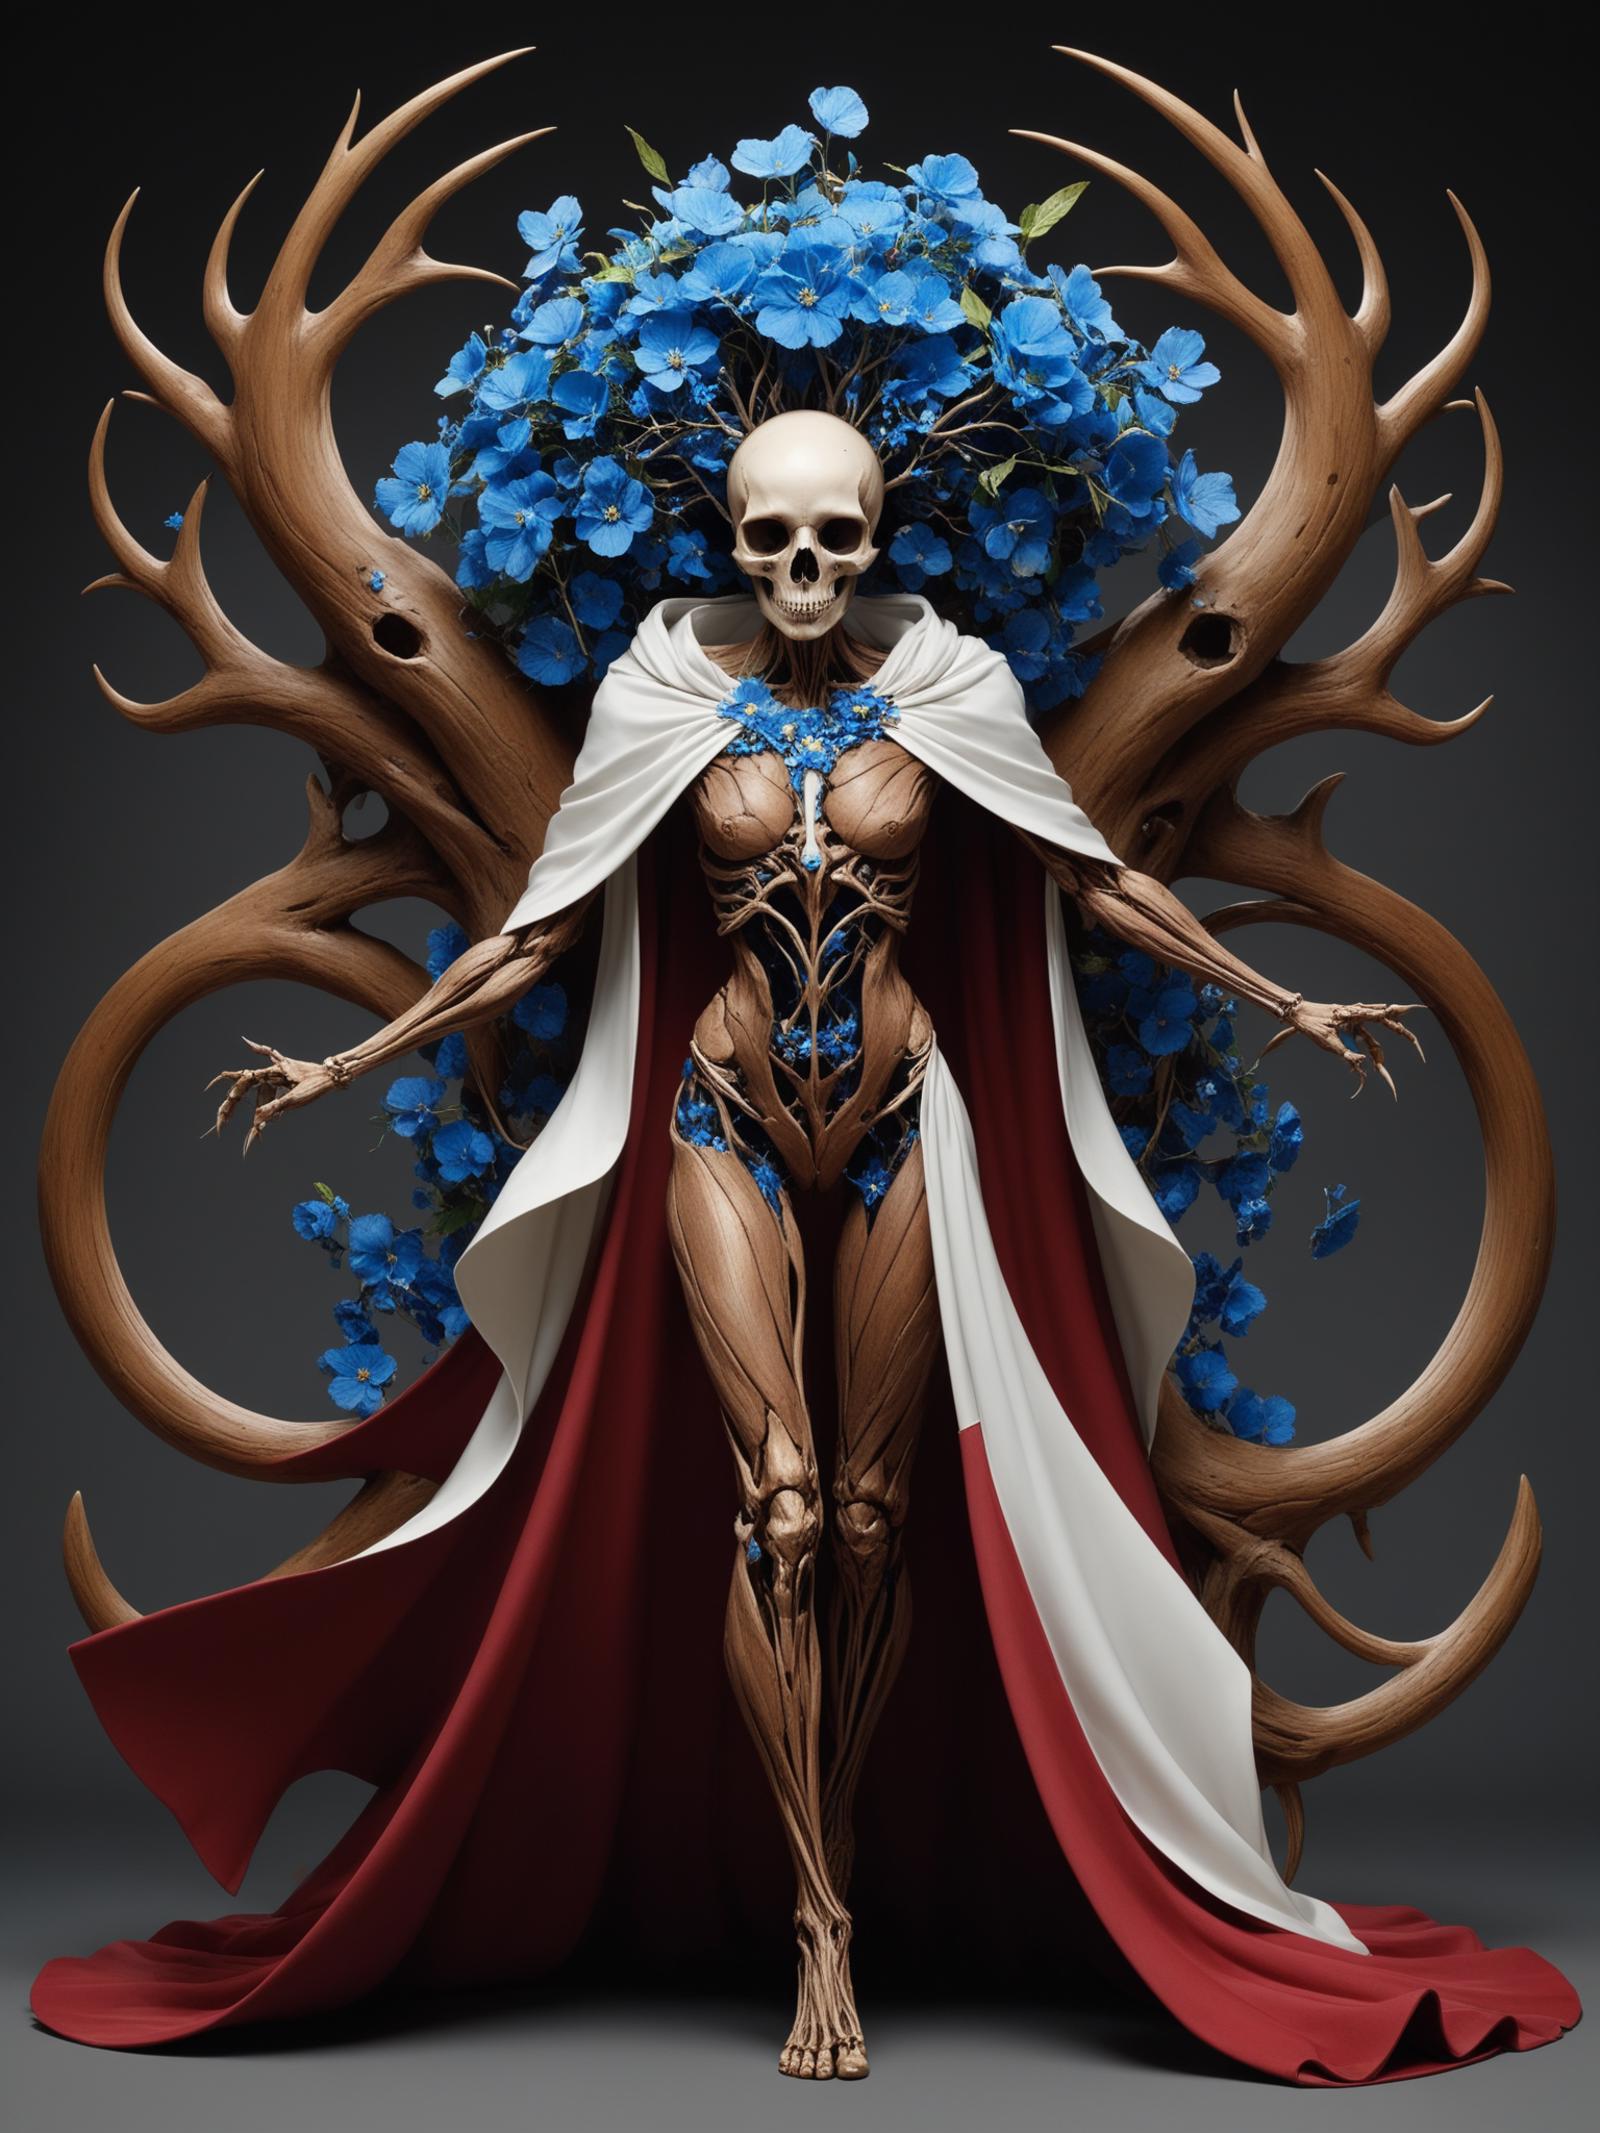 A skeleton wearing a red and white dress with a blue flower tree in the background.